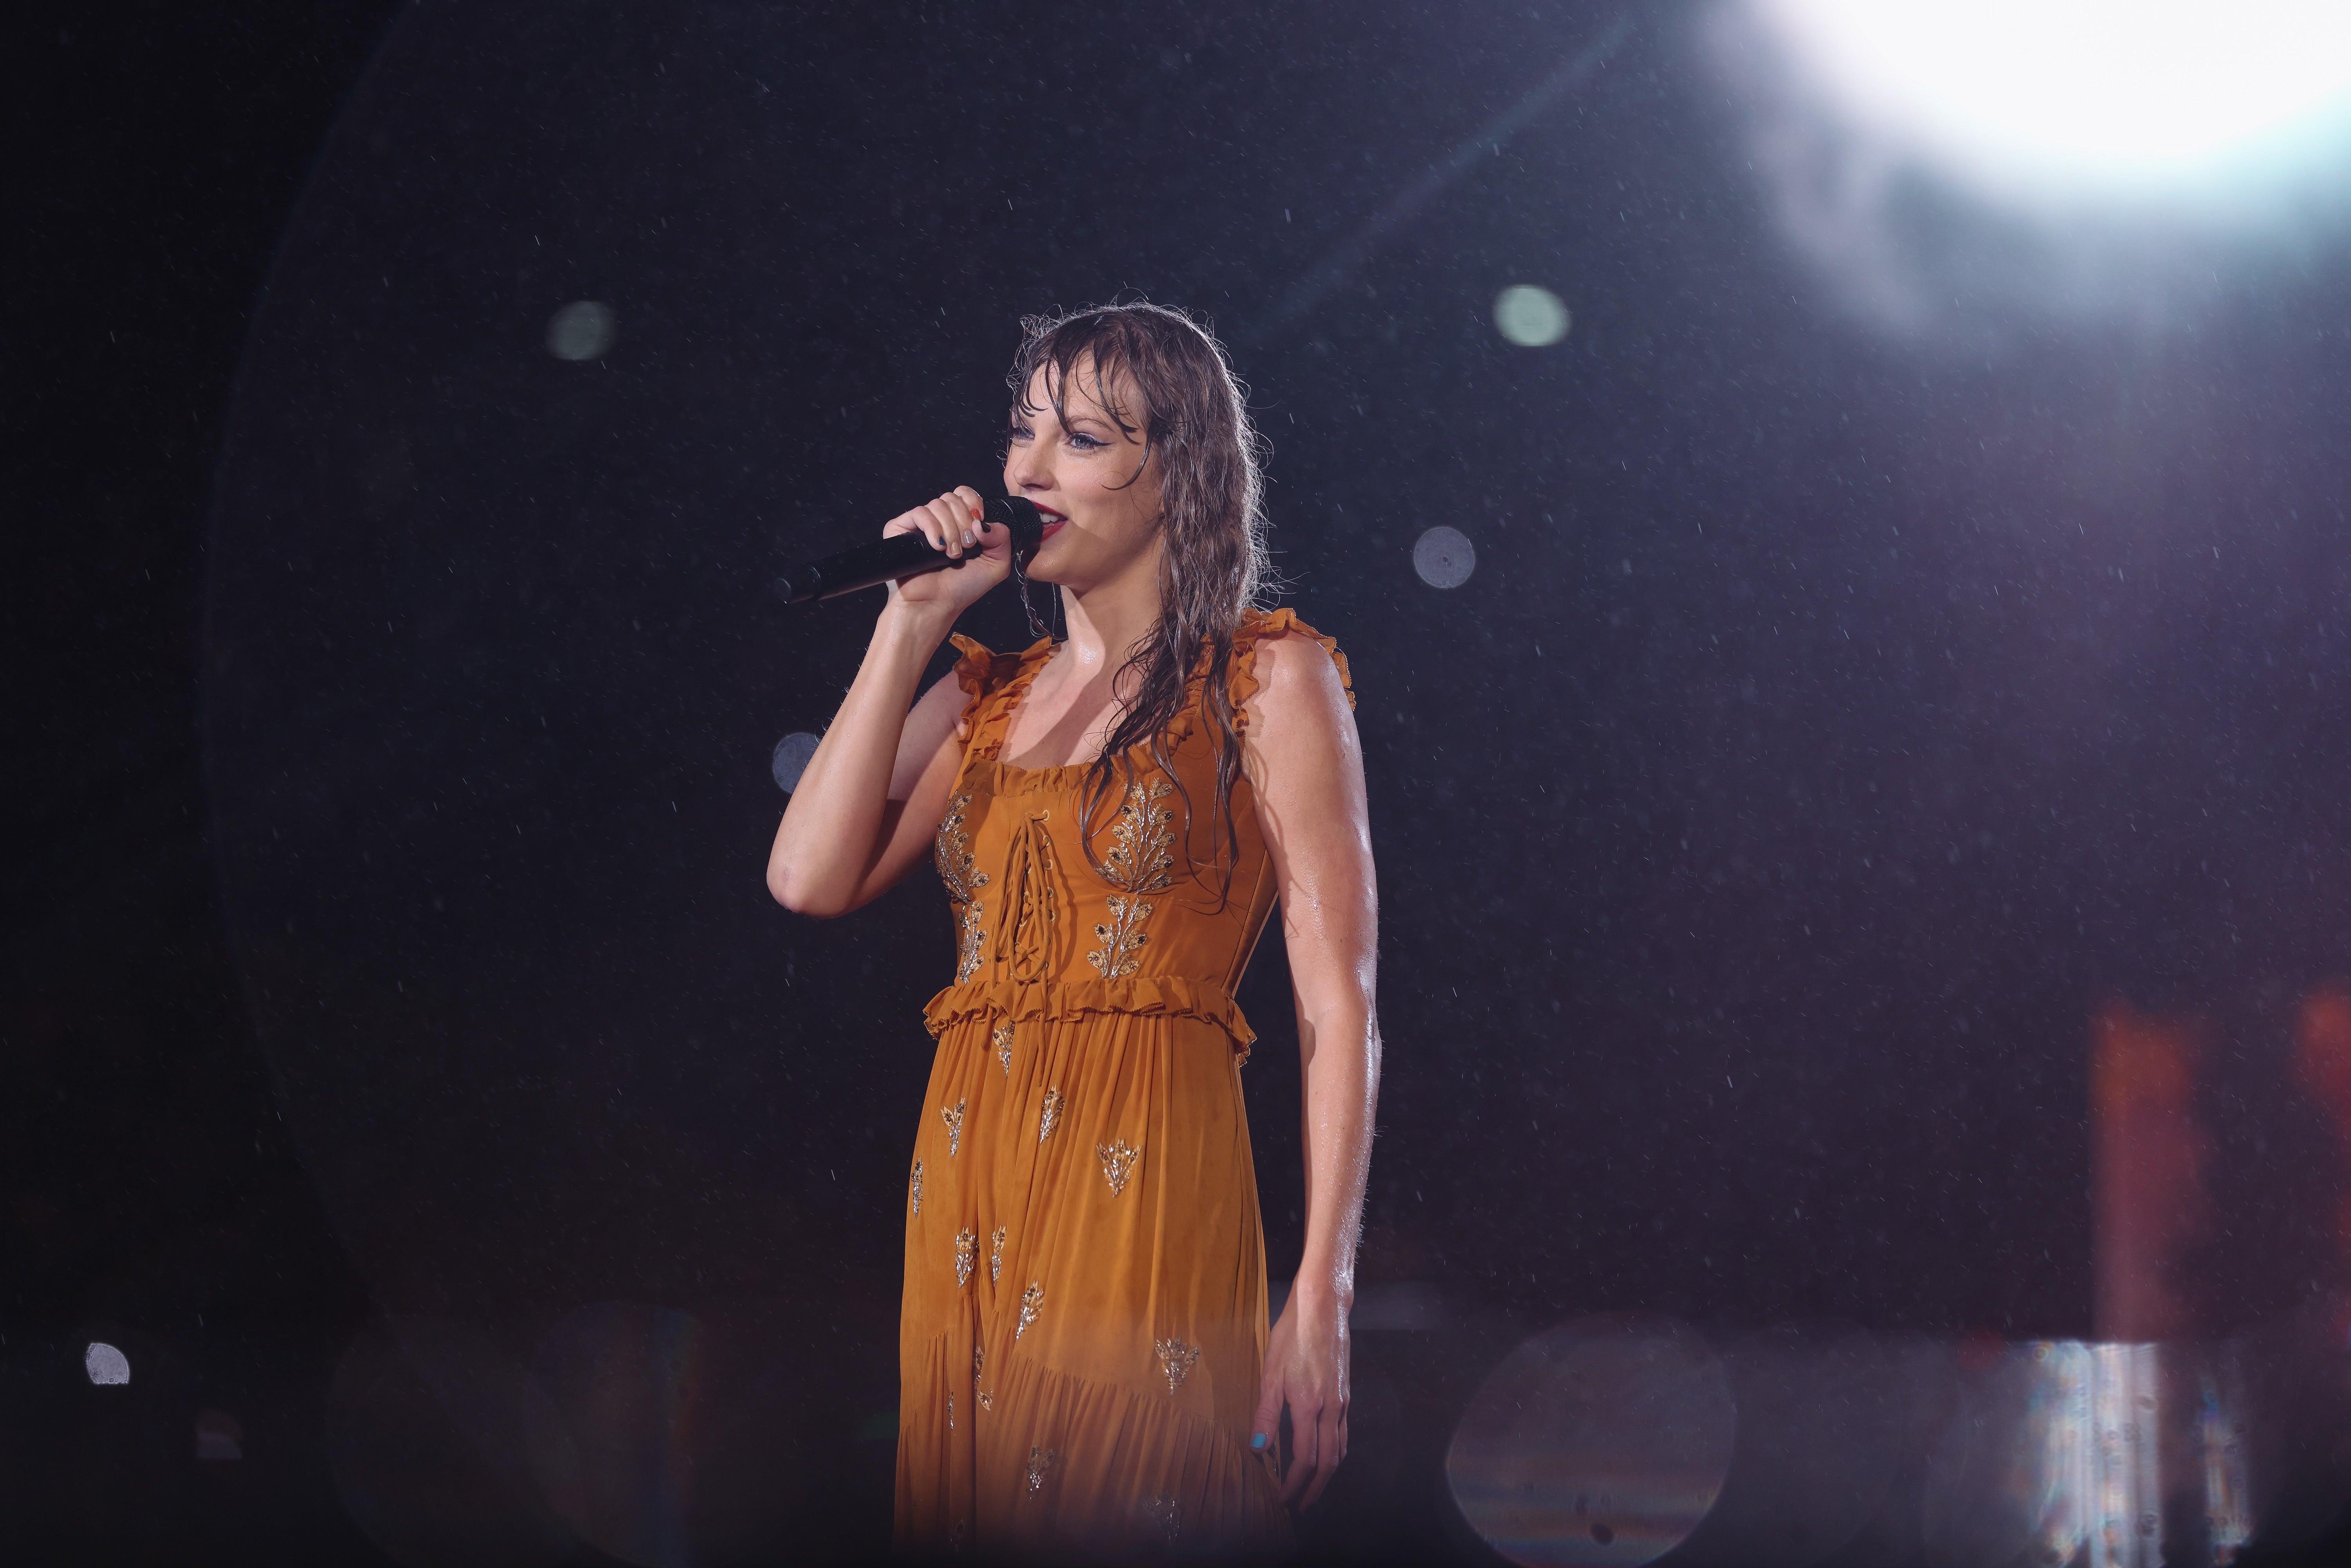 Taylor Swift singing in the rain during a concert